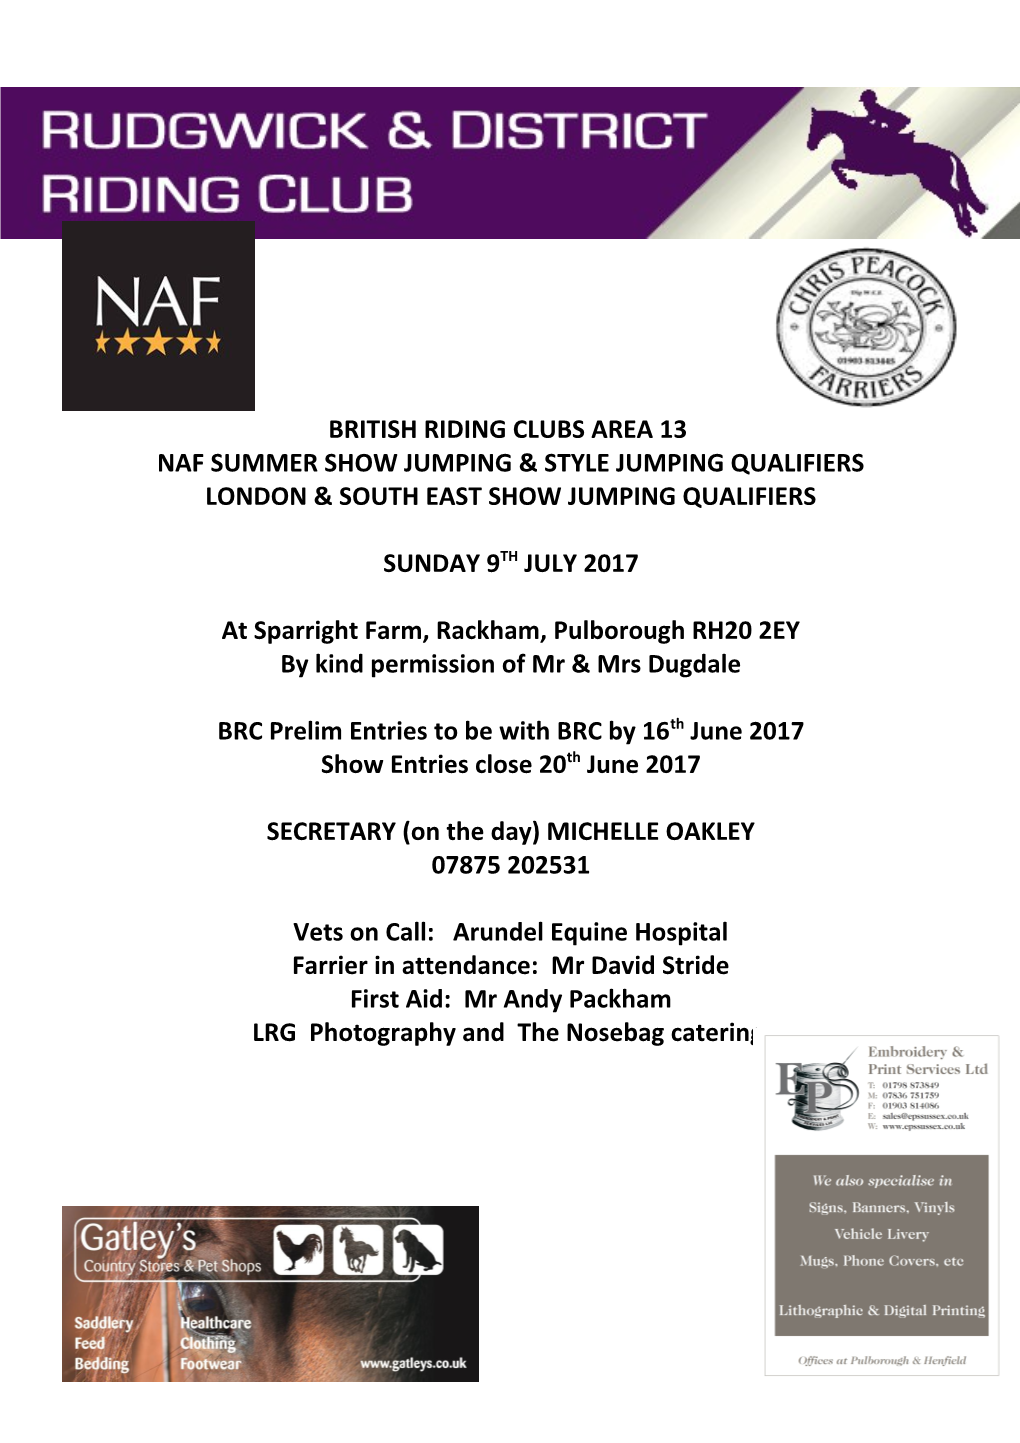 Naf Summer Show Jumping & Style Jumping Qualifiers